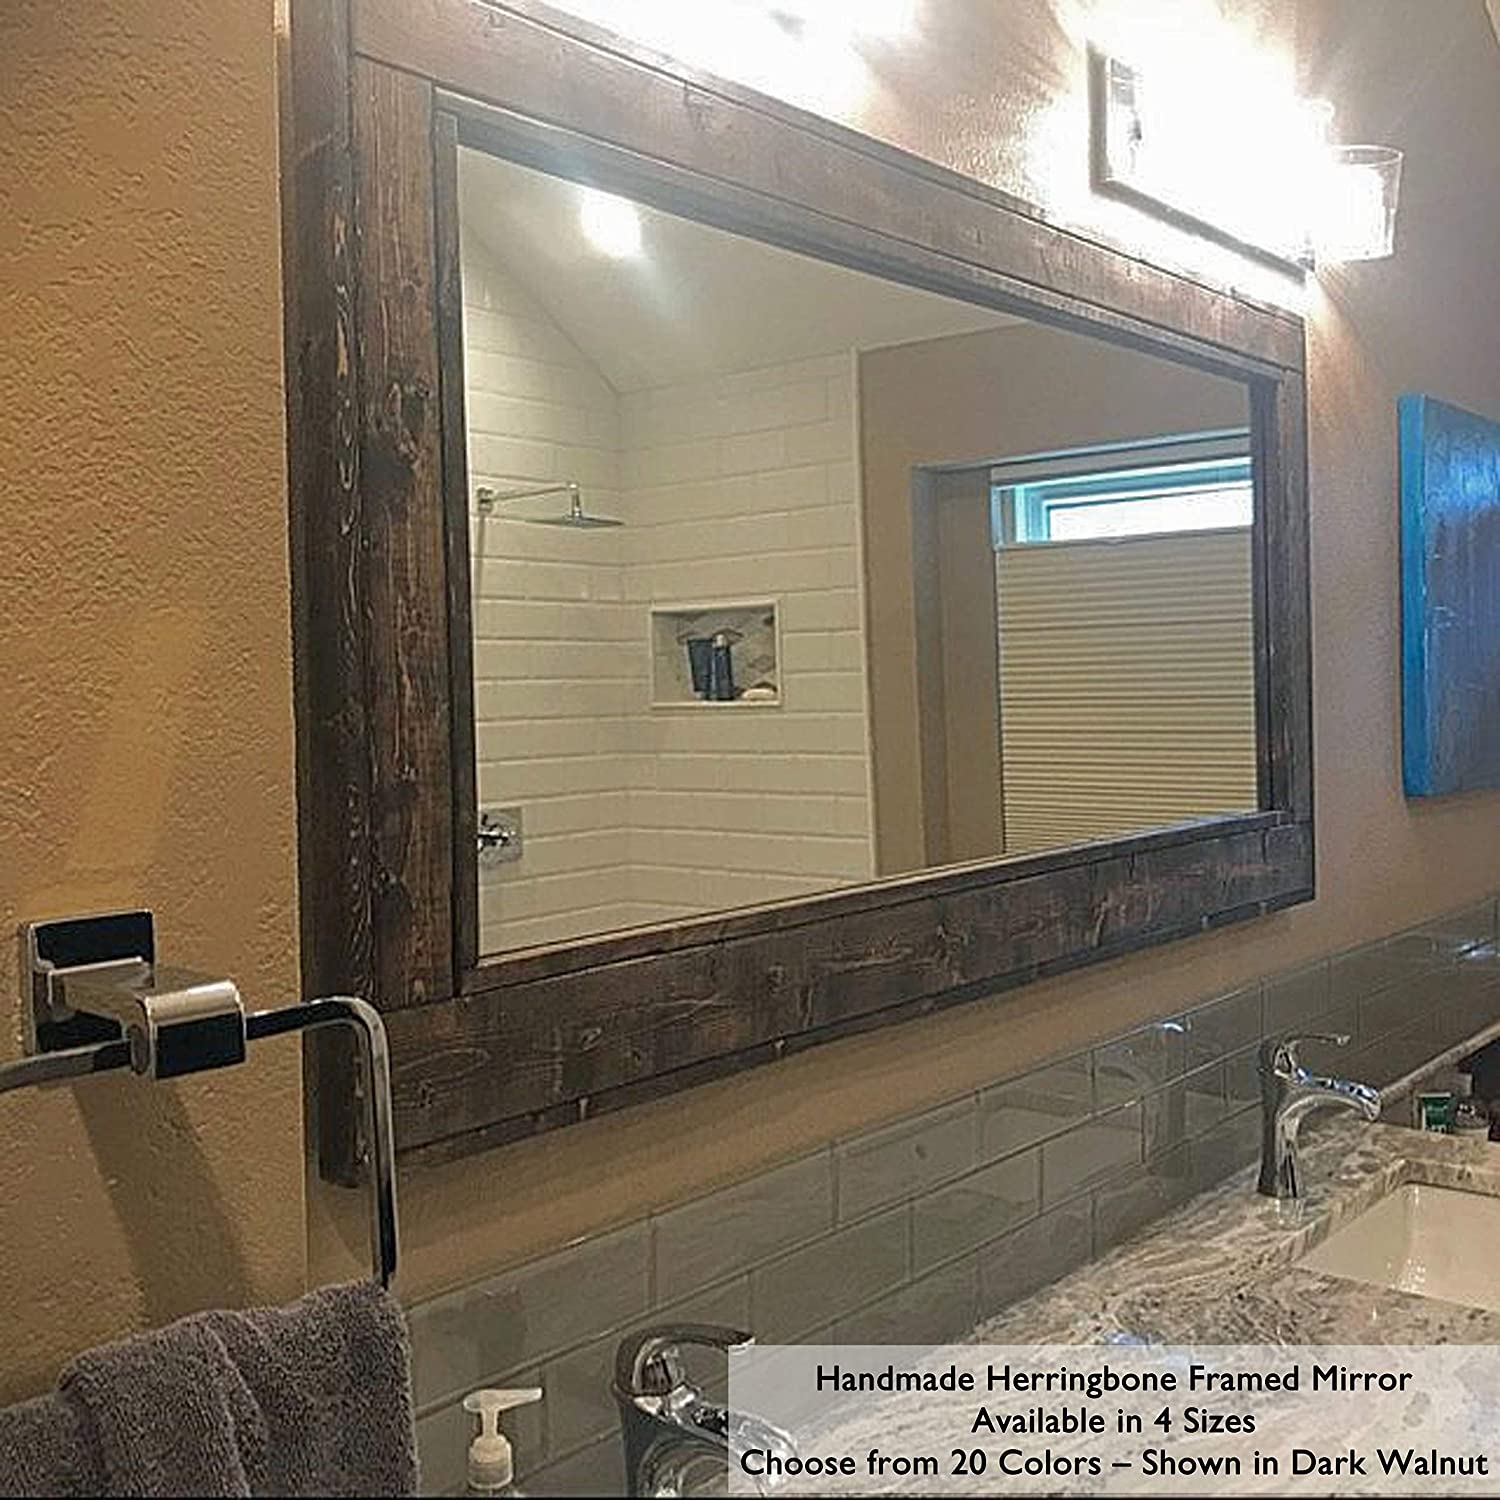 Herringbone Reclaimed Wood Framed Mirror Rustic Mirror Available in 4 Sizes and 20 Paint Colors: Shown in Sea Blue 42x30x 60x30 Framed Mirror Wall Decor 36x30 24x30 Home Decor Accents 